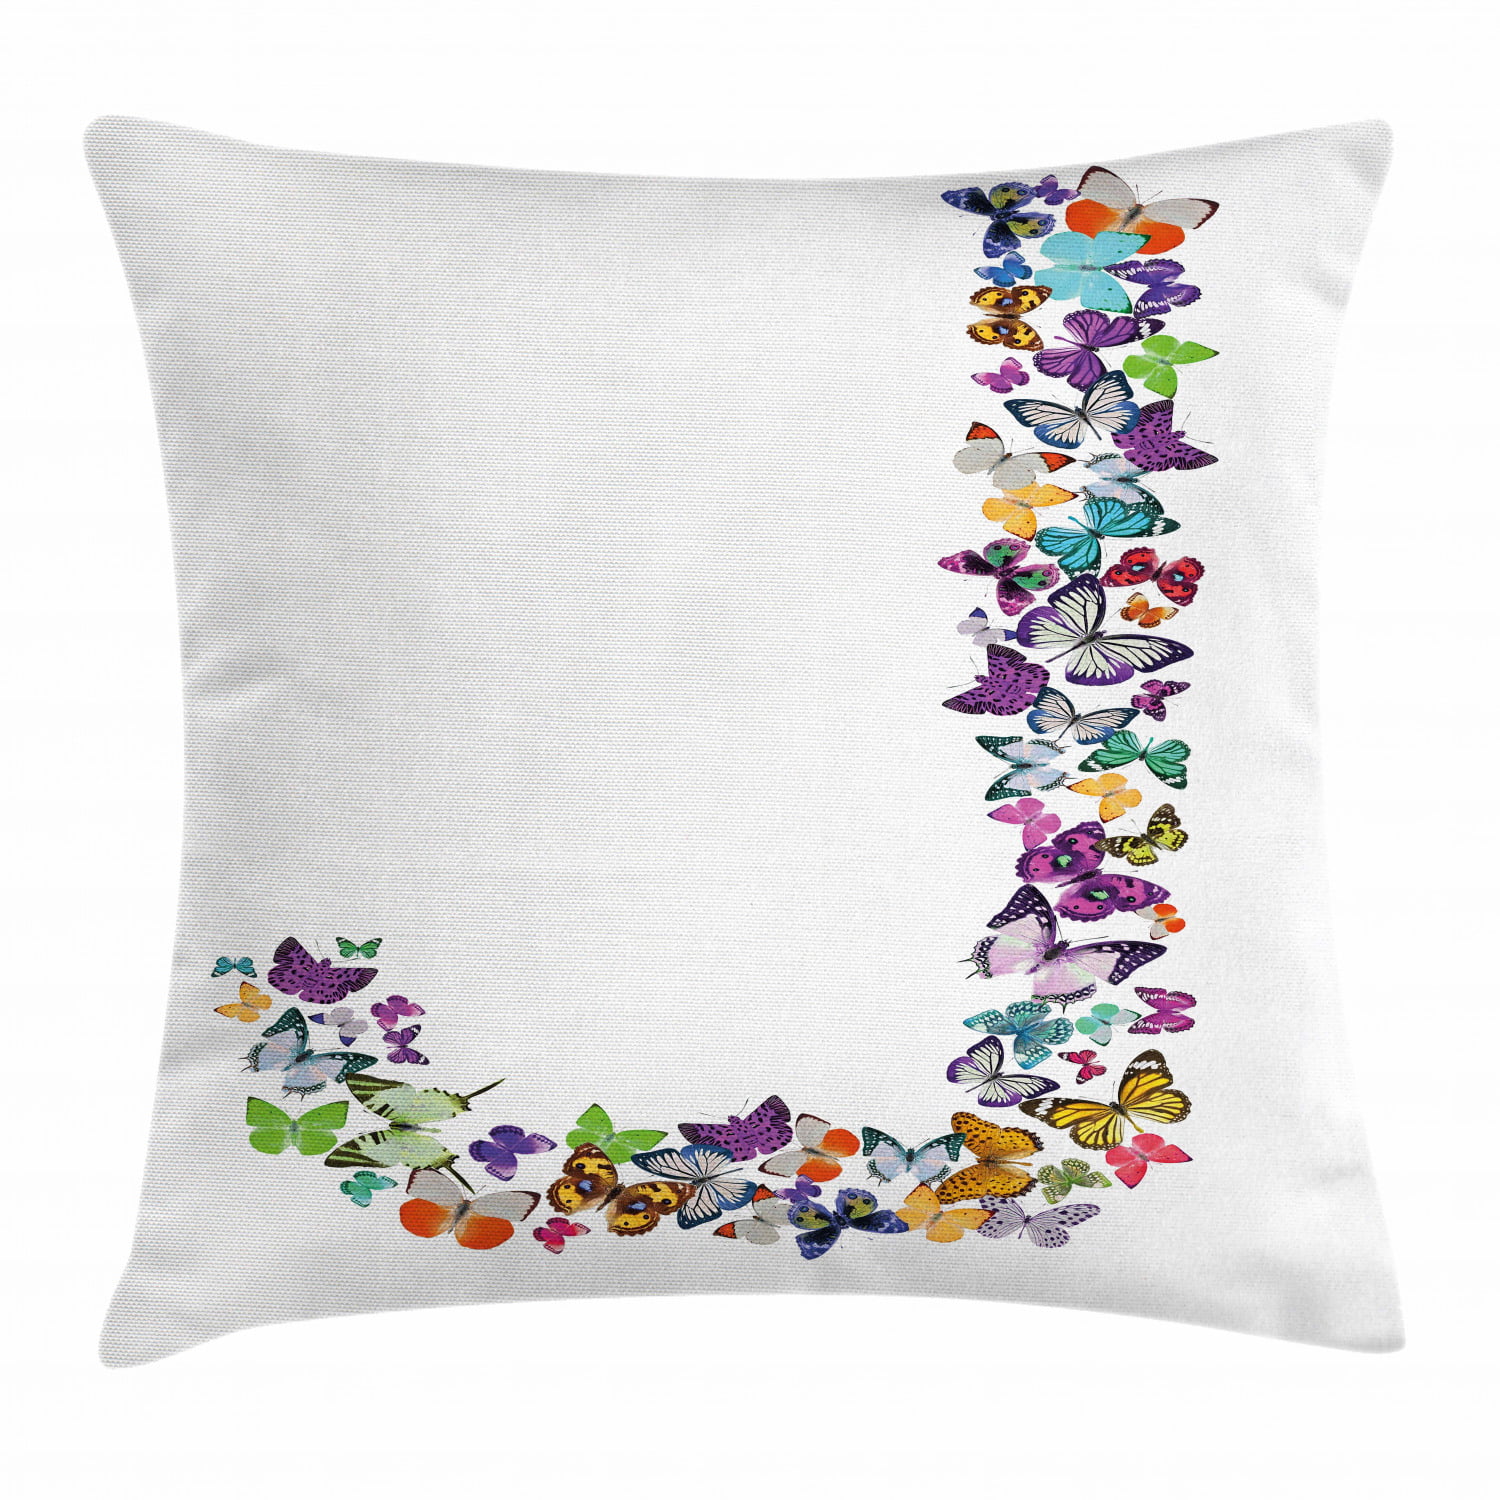 Interior Decorating Gifts Printed On Faux Reptile Skin Cushion Throw Pillow Multicolor 16x16 